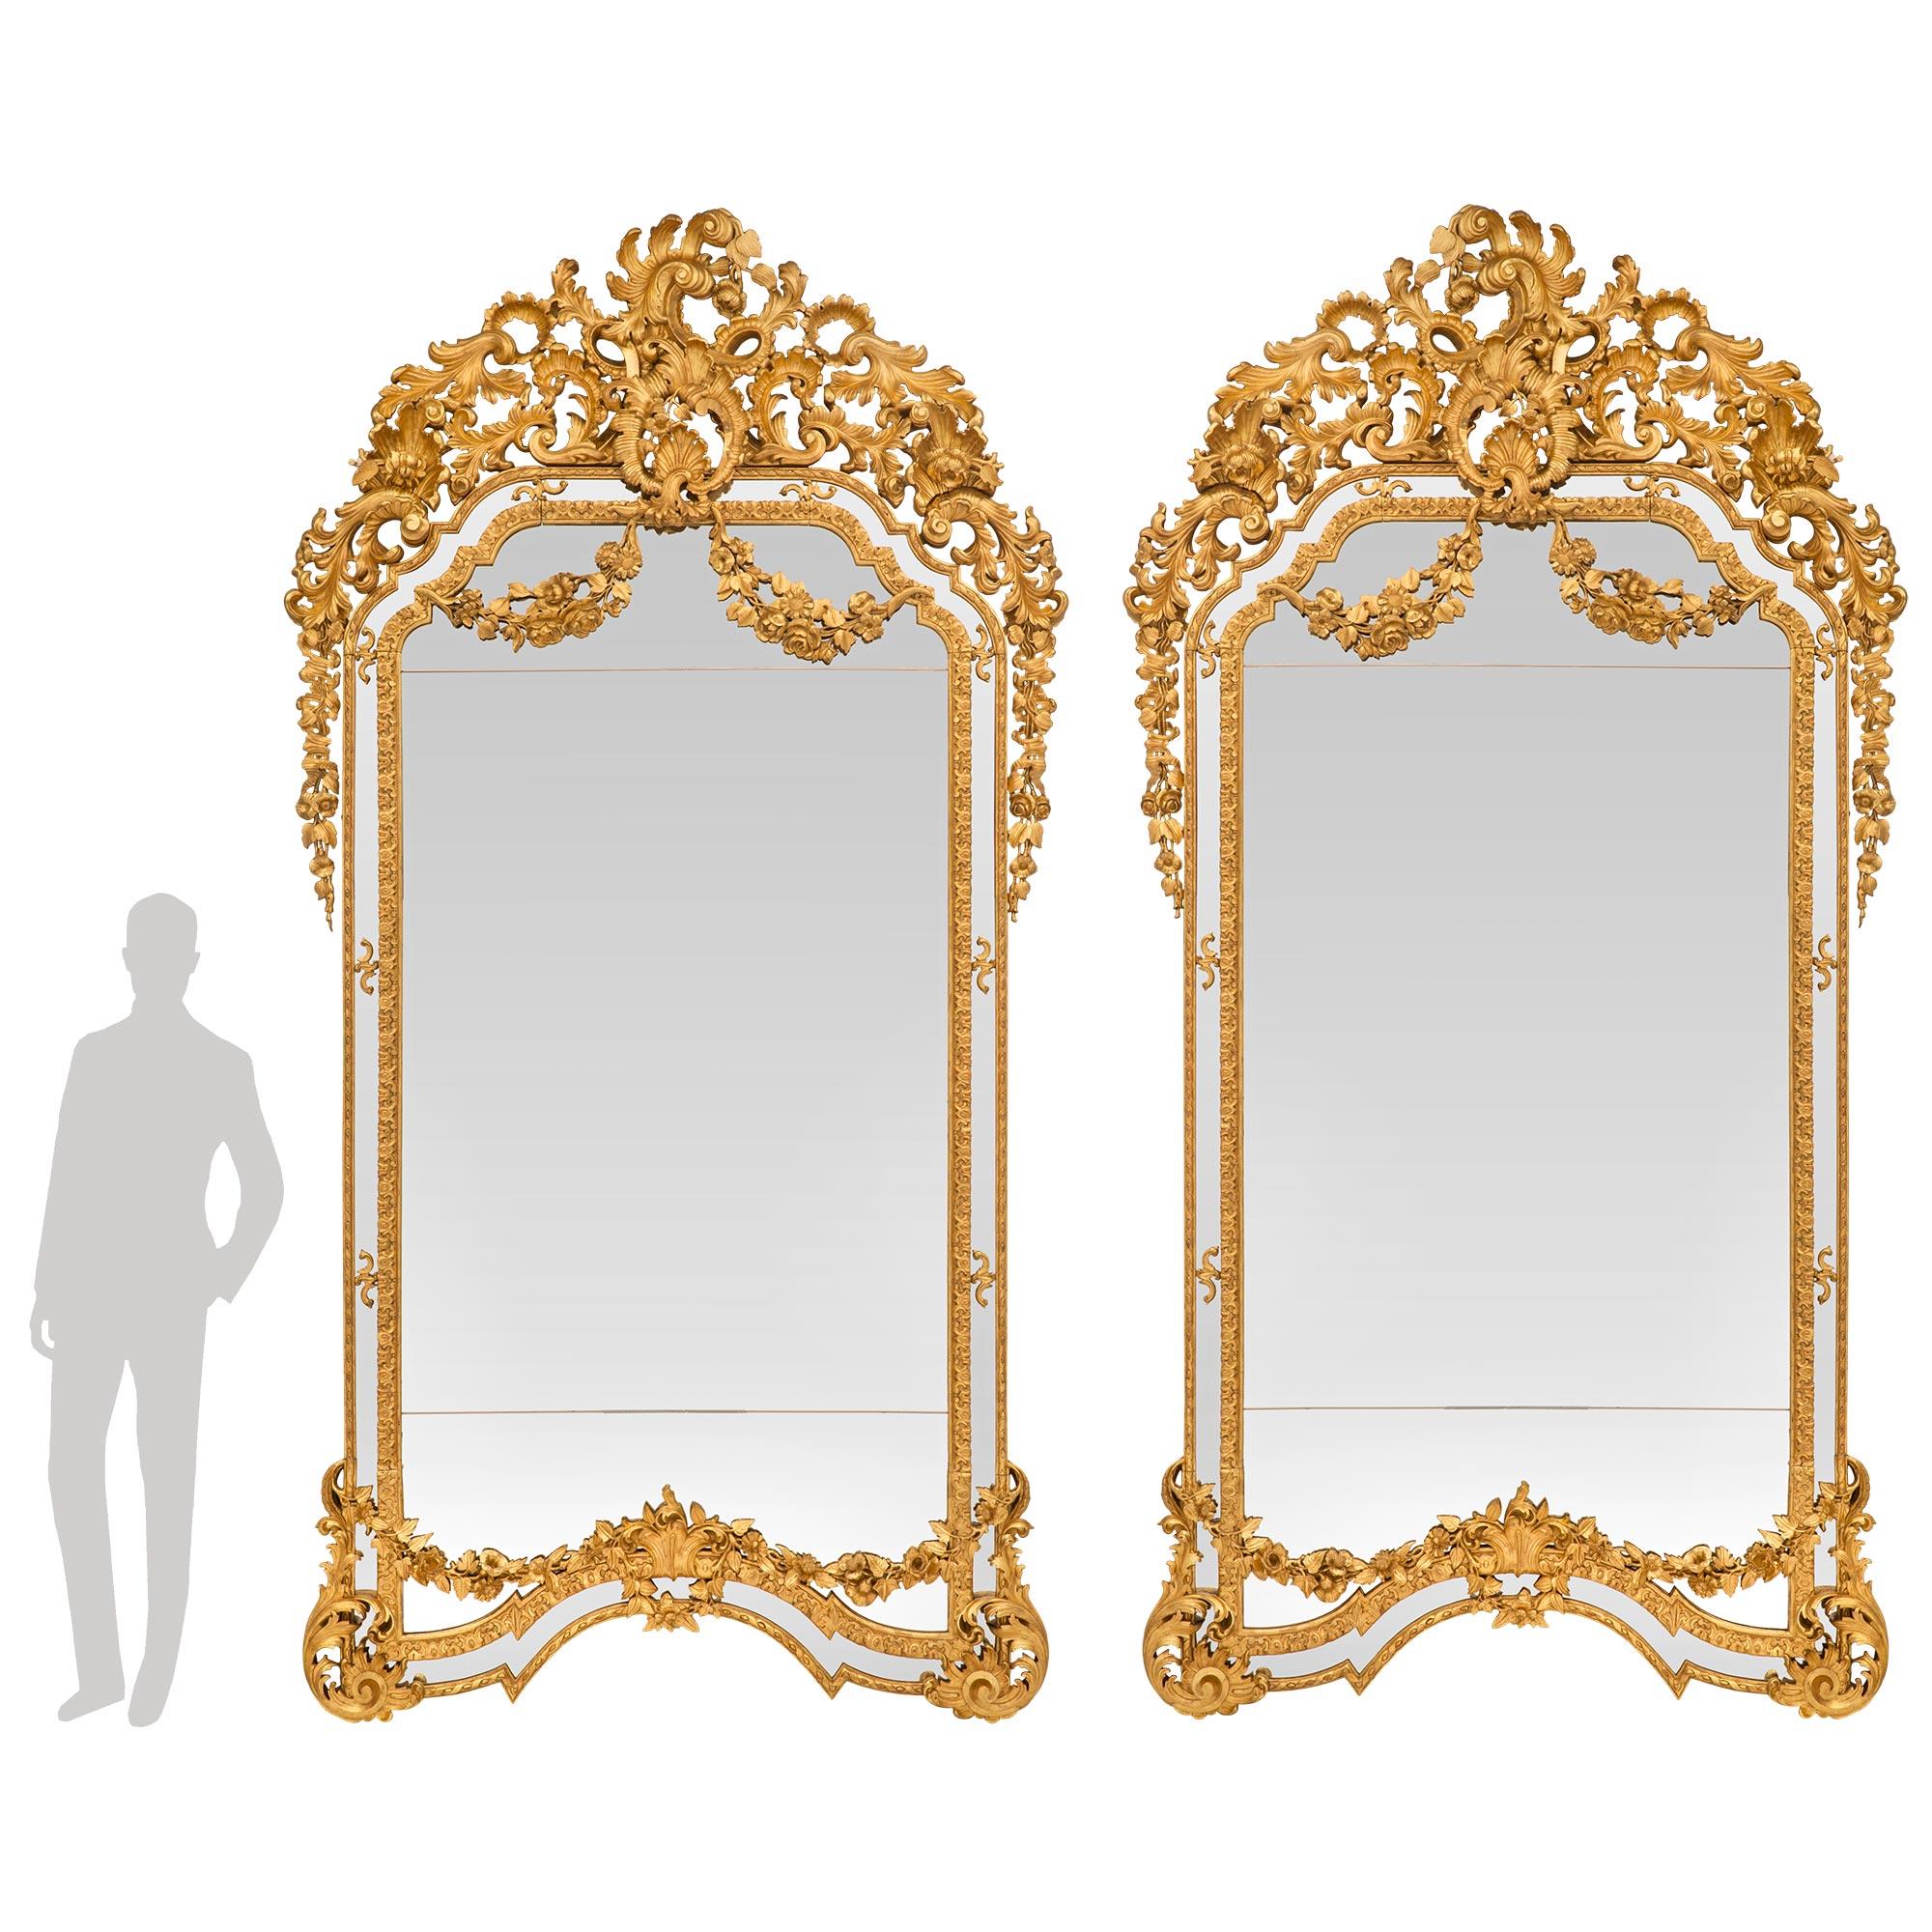 A sensational and very rare pair of palatially scaled Italian mid 19th century Baroque st. double framed giltwood mirrors. Each mirror retains all of its original mirror plates throughout framed within a beautiful mottled foliate band and fine